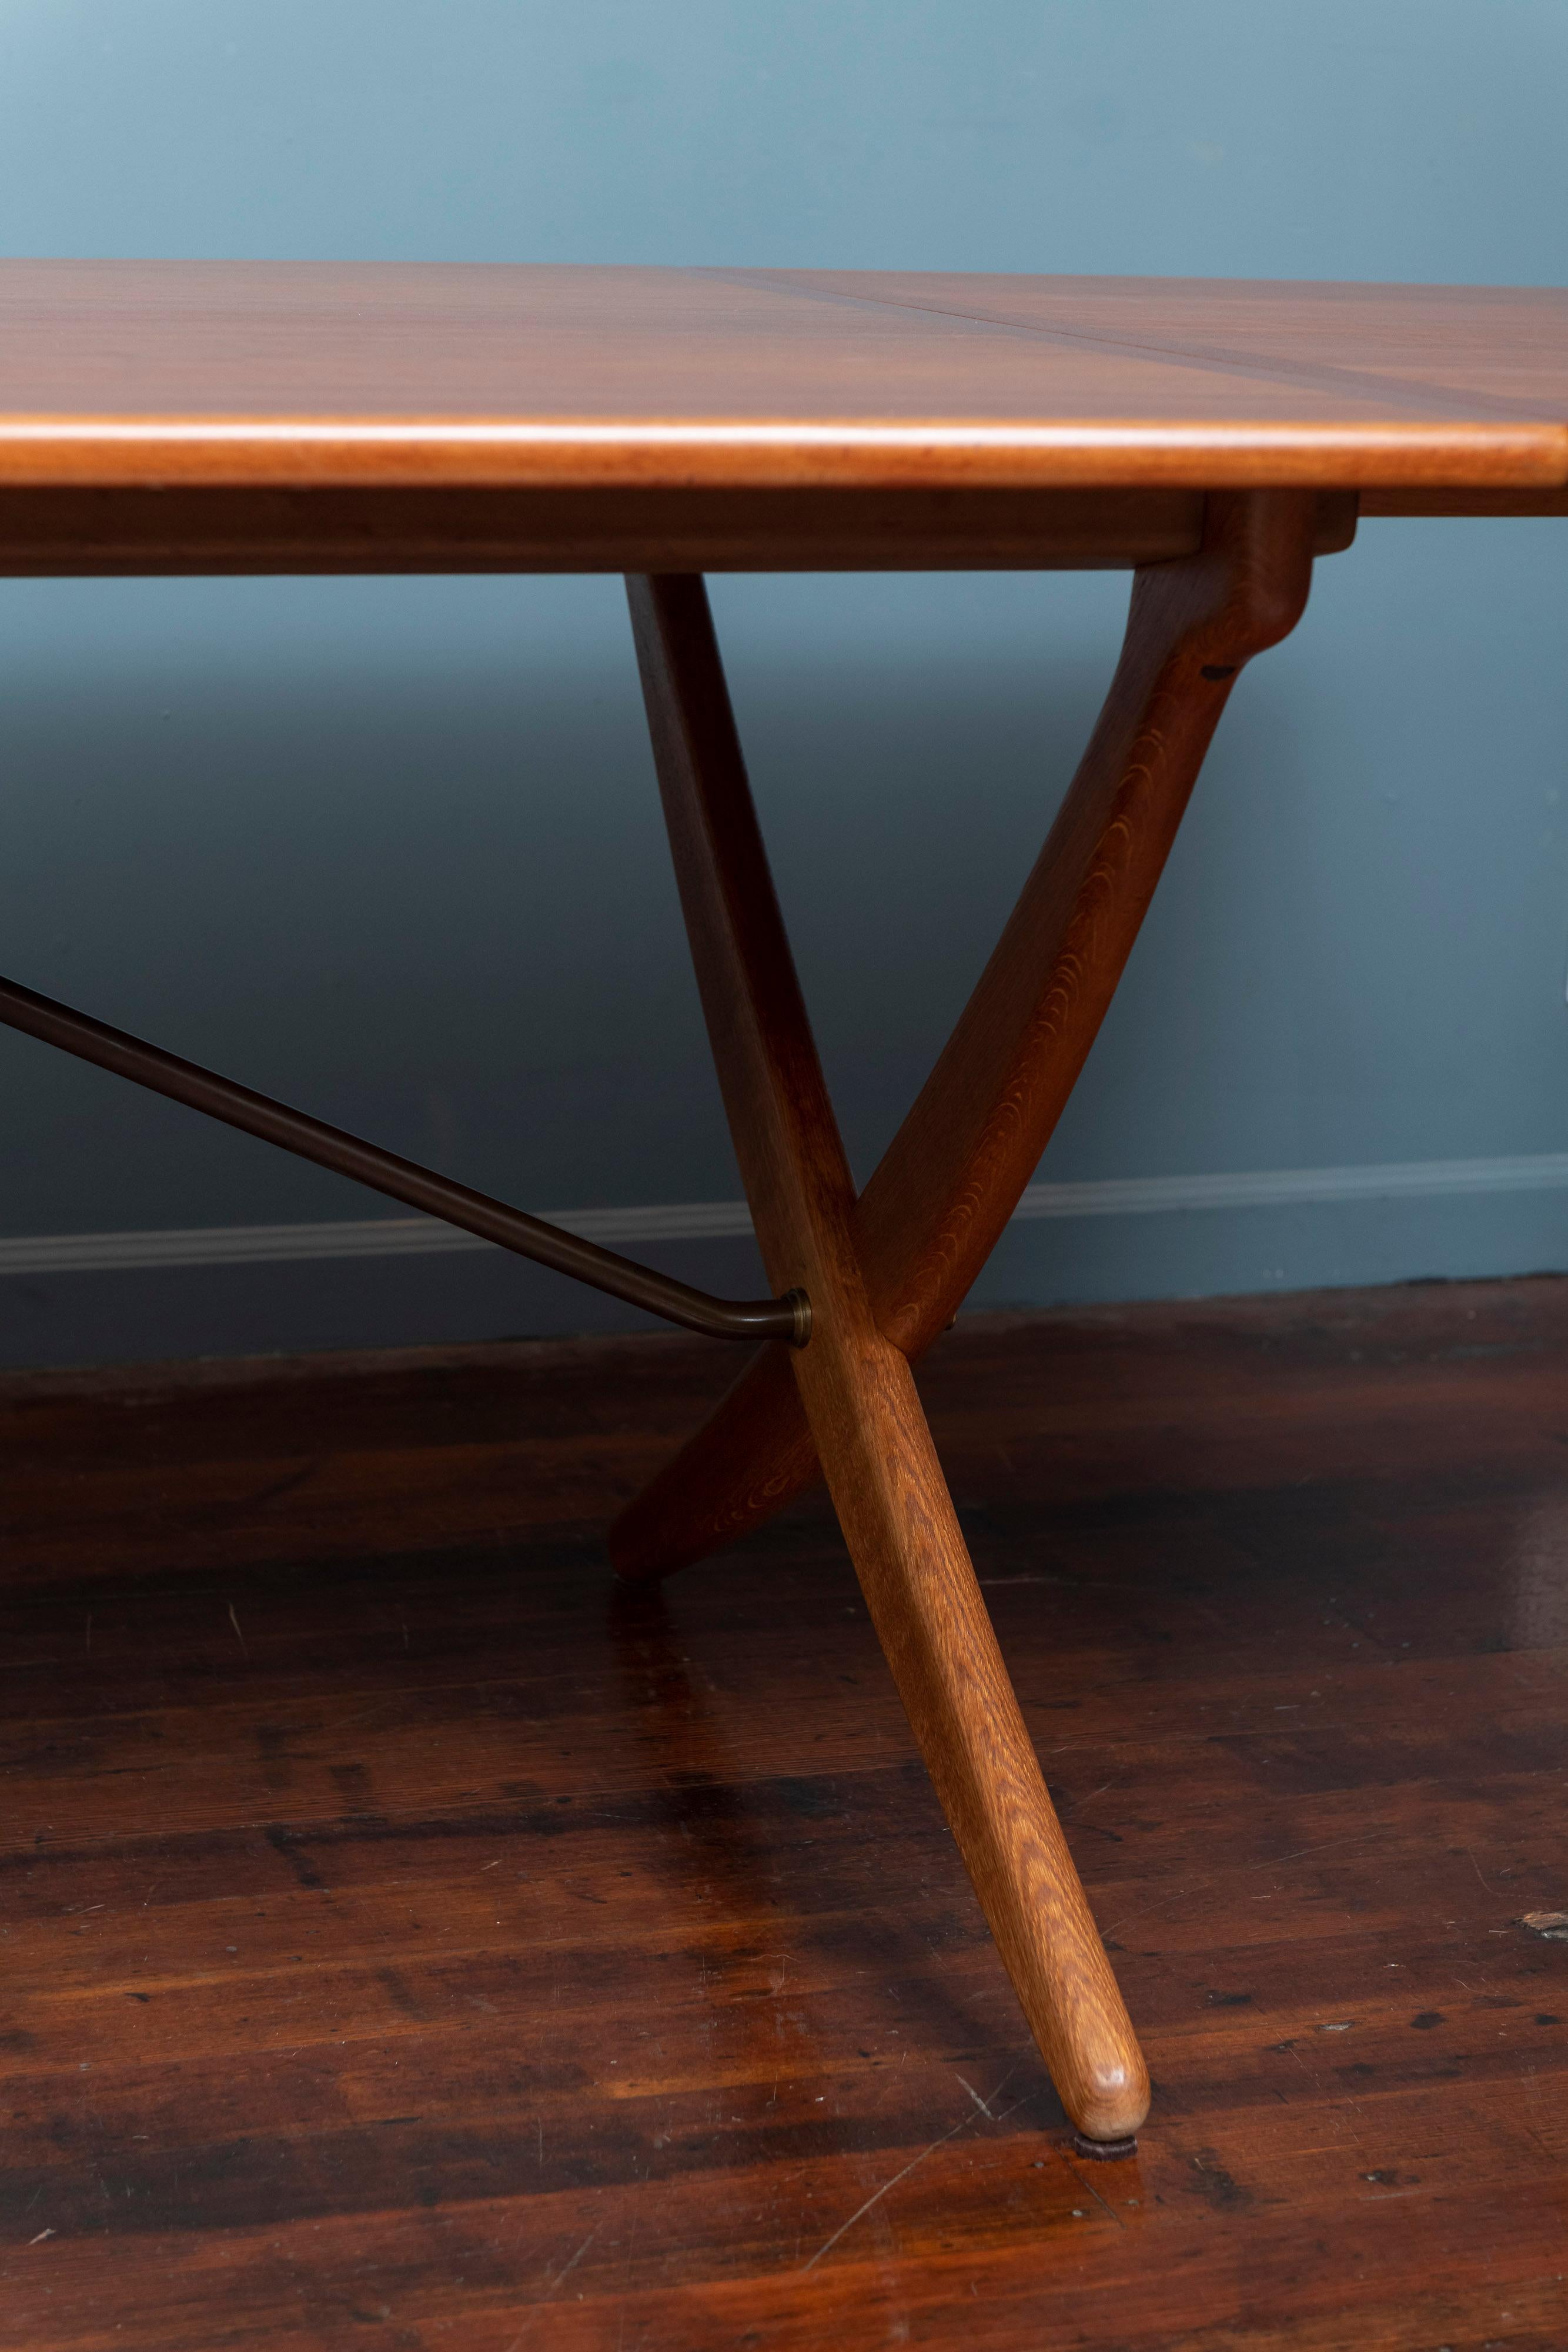 Mid-20th Century Hans Wegner Drop Leaf Dining Table for Andreas Tuck, Model AT-314 For Sale